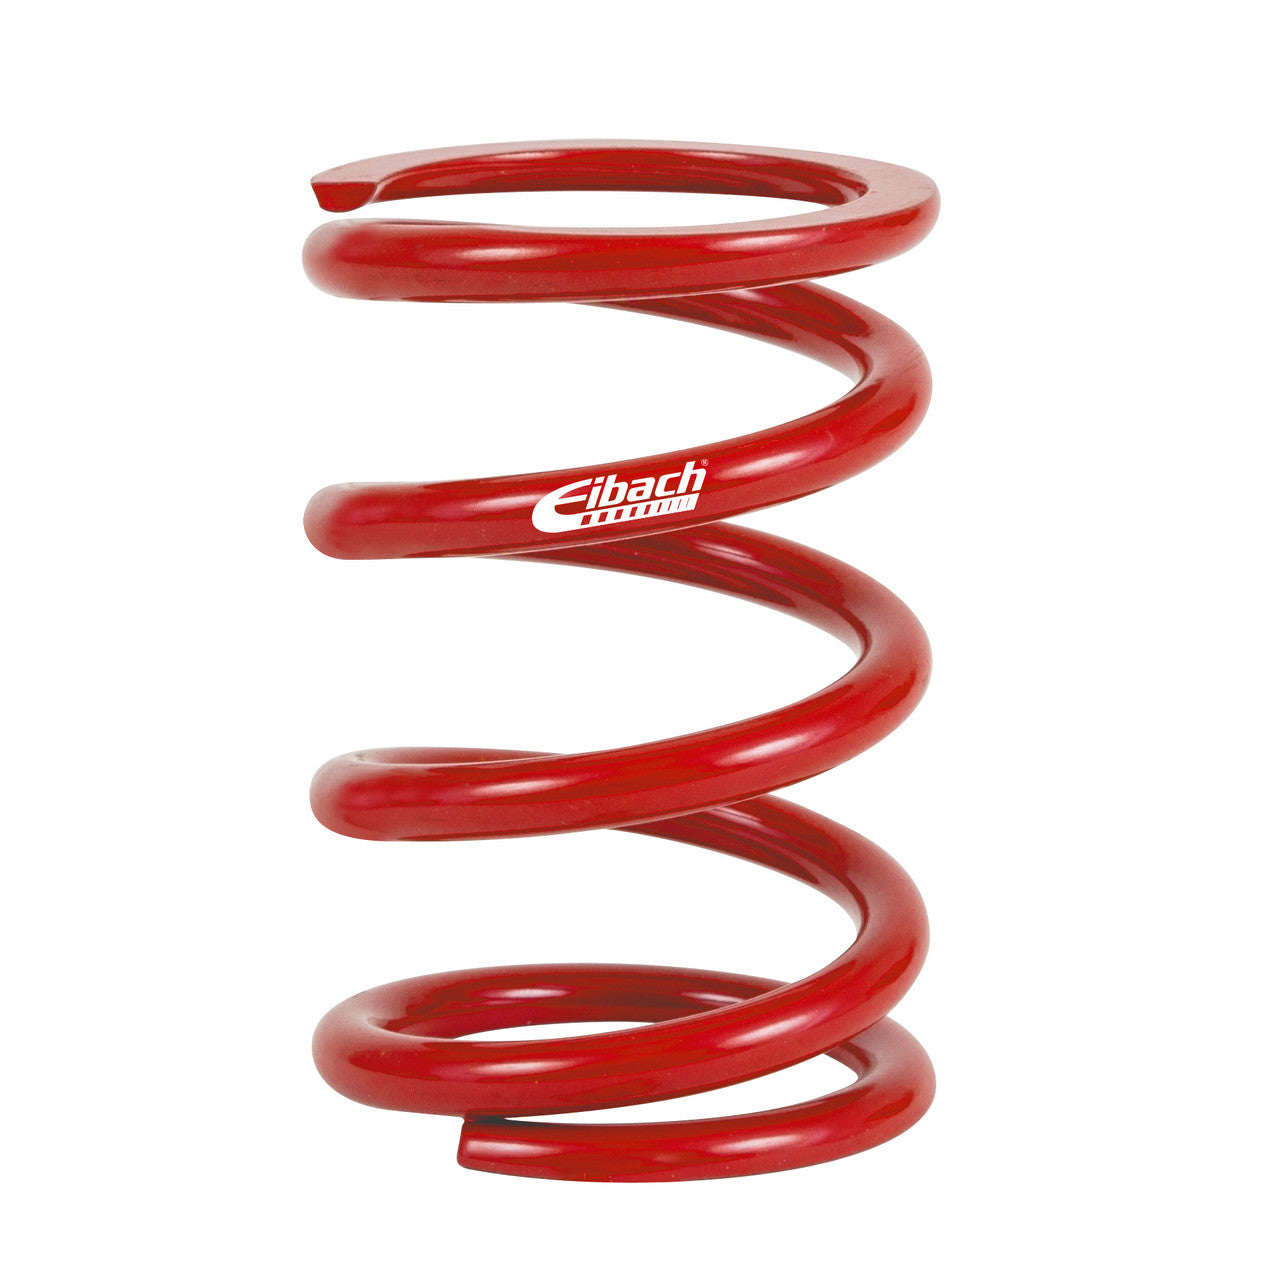 Eibach Metric Coilover Spring - 60MM I.D. 100-60-0320